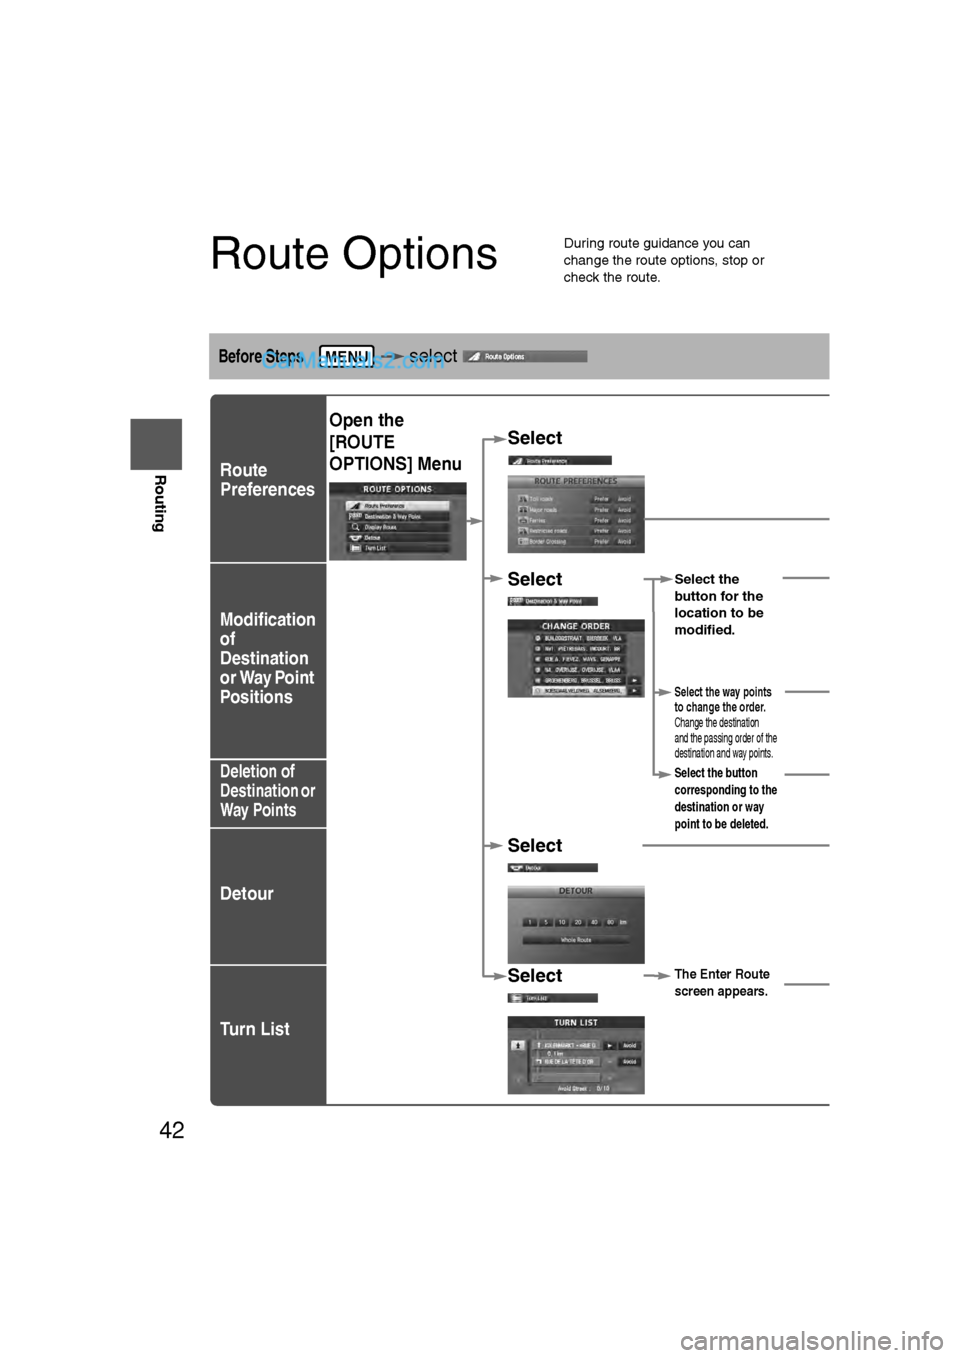 MAZDA MODEL CX-9 2009  Navigation Manual (in English) 42
Before 
UseGetting
started
Routing
Route Options
l
During route guidance you can 
change the route options, stop or 
check the route.
Before Steps  select   
Route
Preferences
Modification
of
Desti